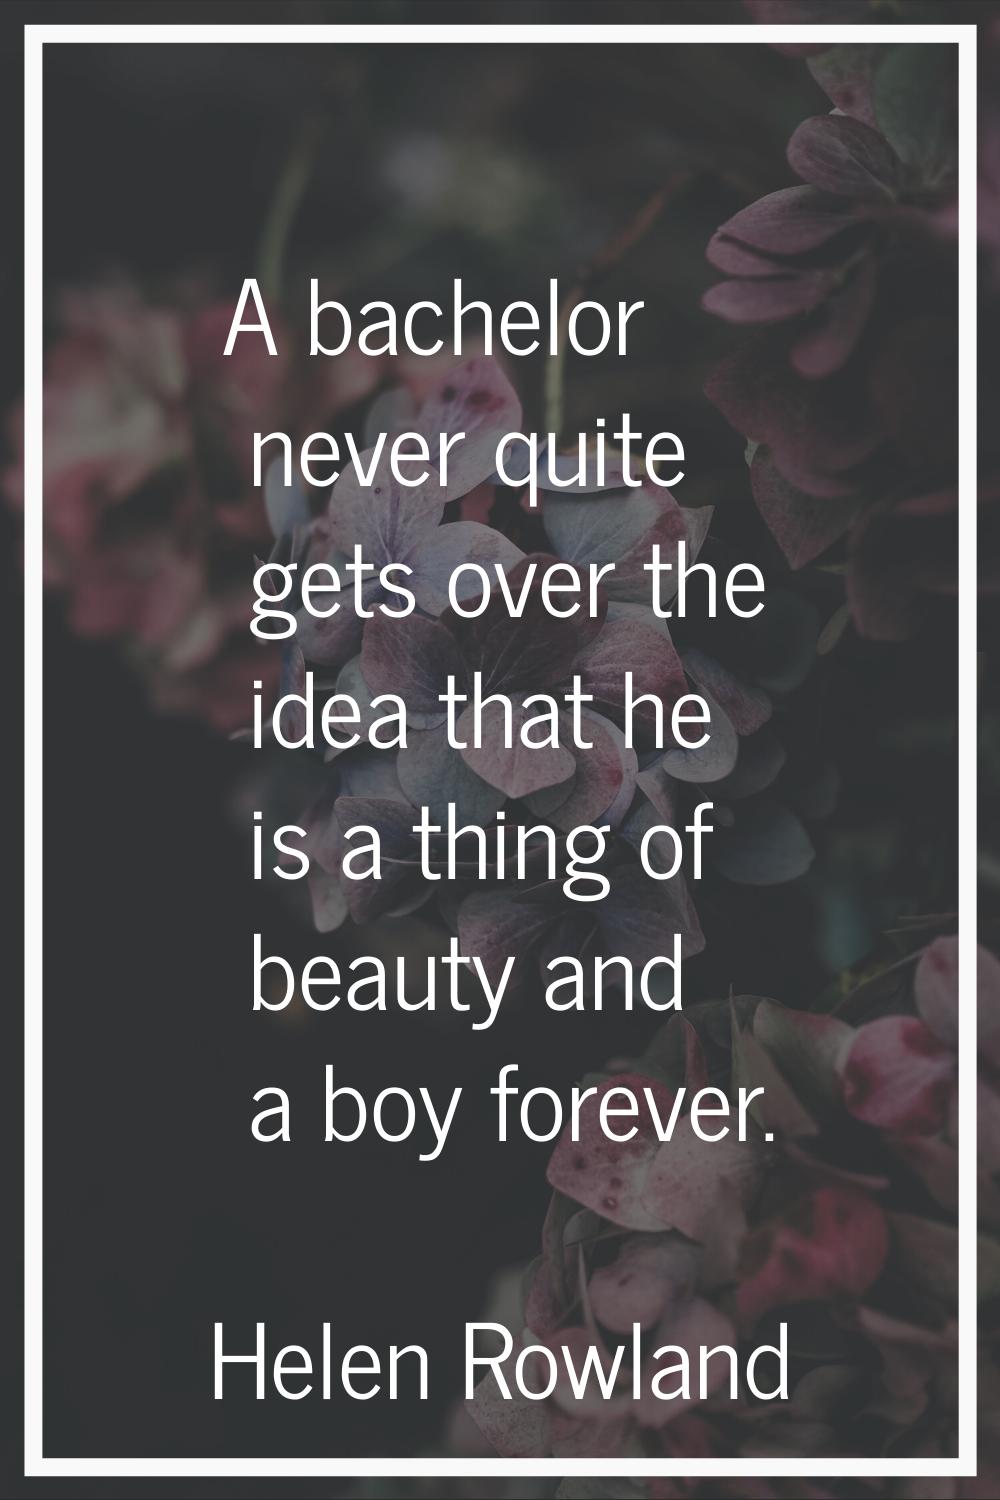 A bachelor never quite gets over the idea that he is a thing of beauty and a boy forever.